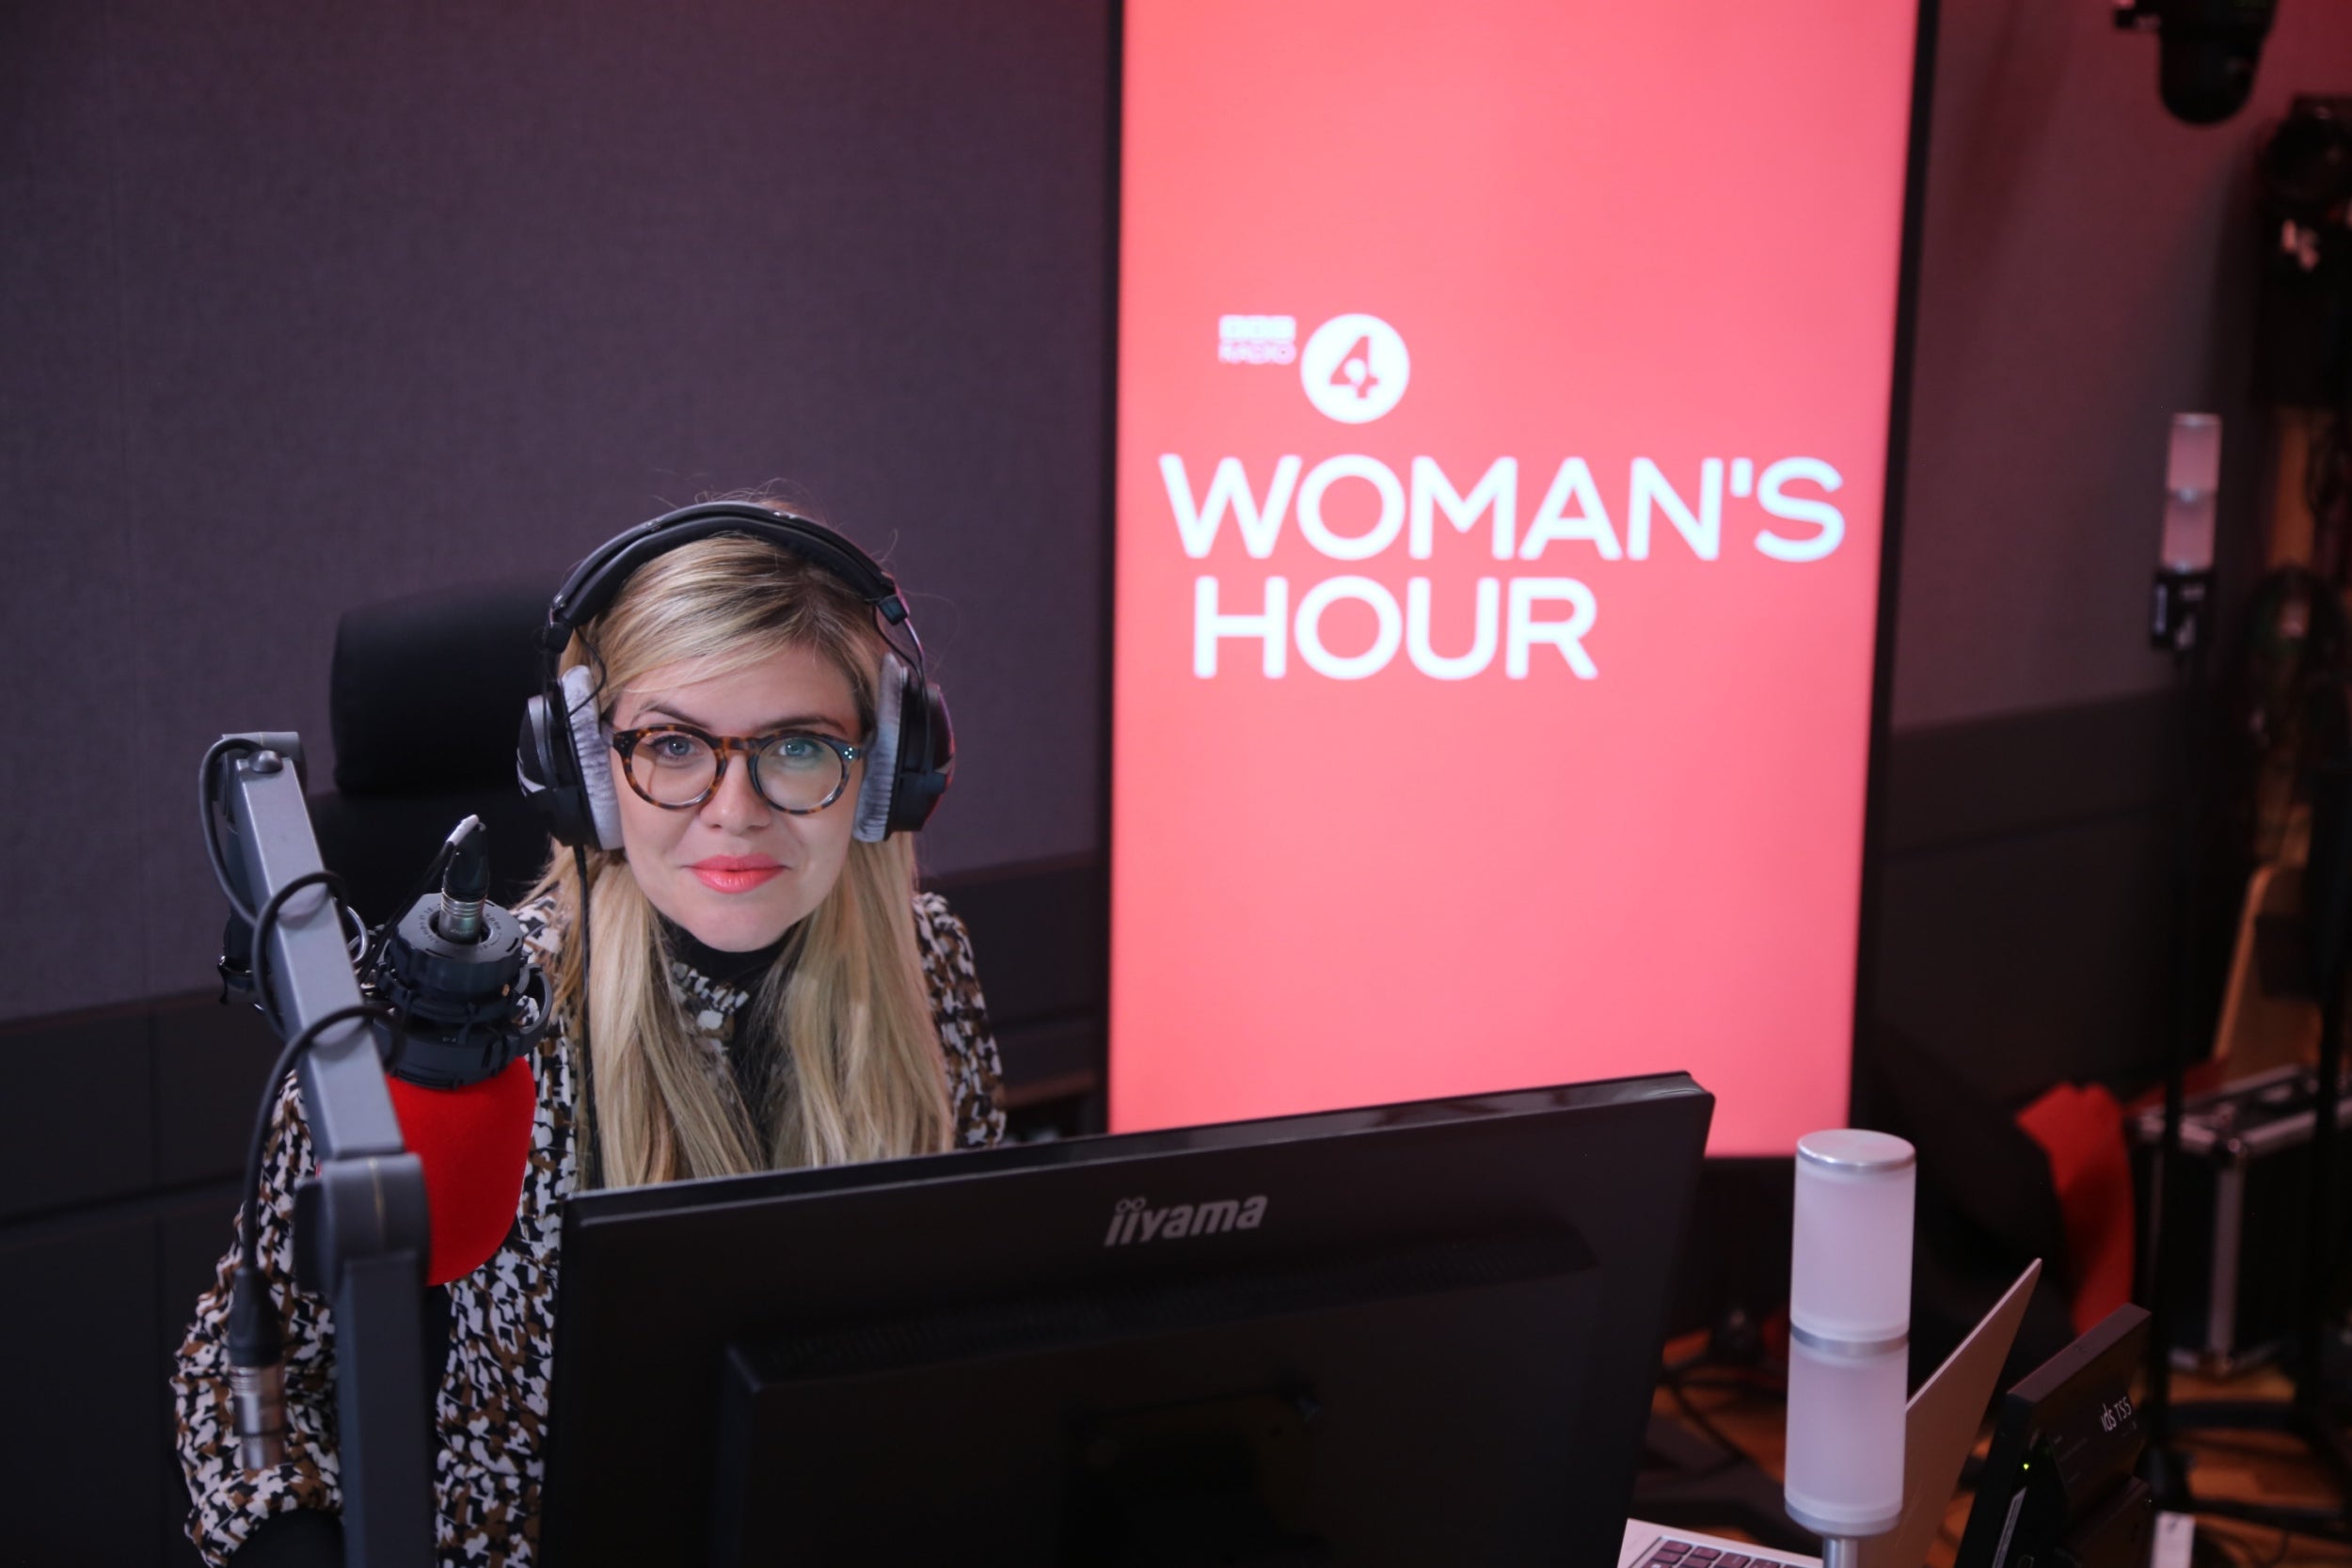 BBC Radio 4, home of ‘Woman’s Hour’, continues to have a steady stream of listeners at 10.8 million a week